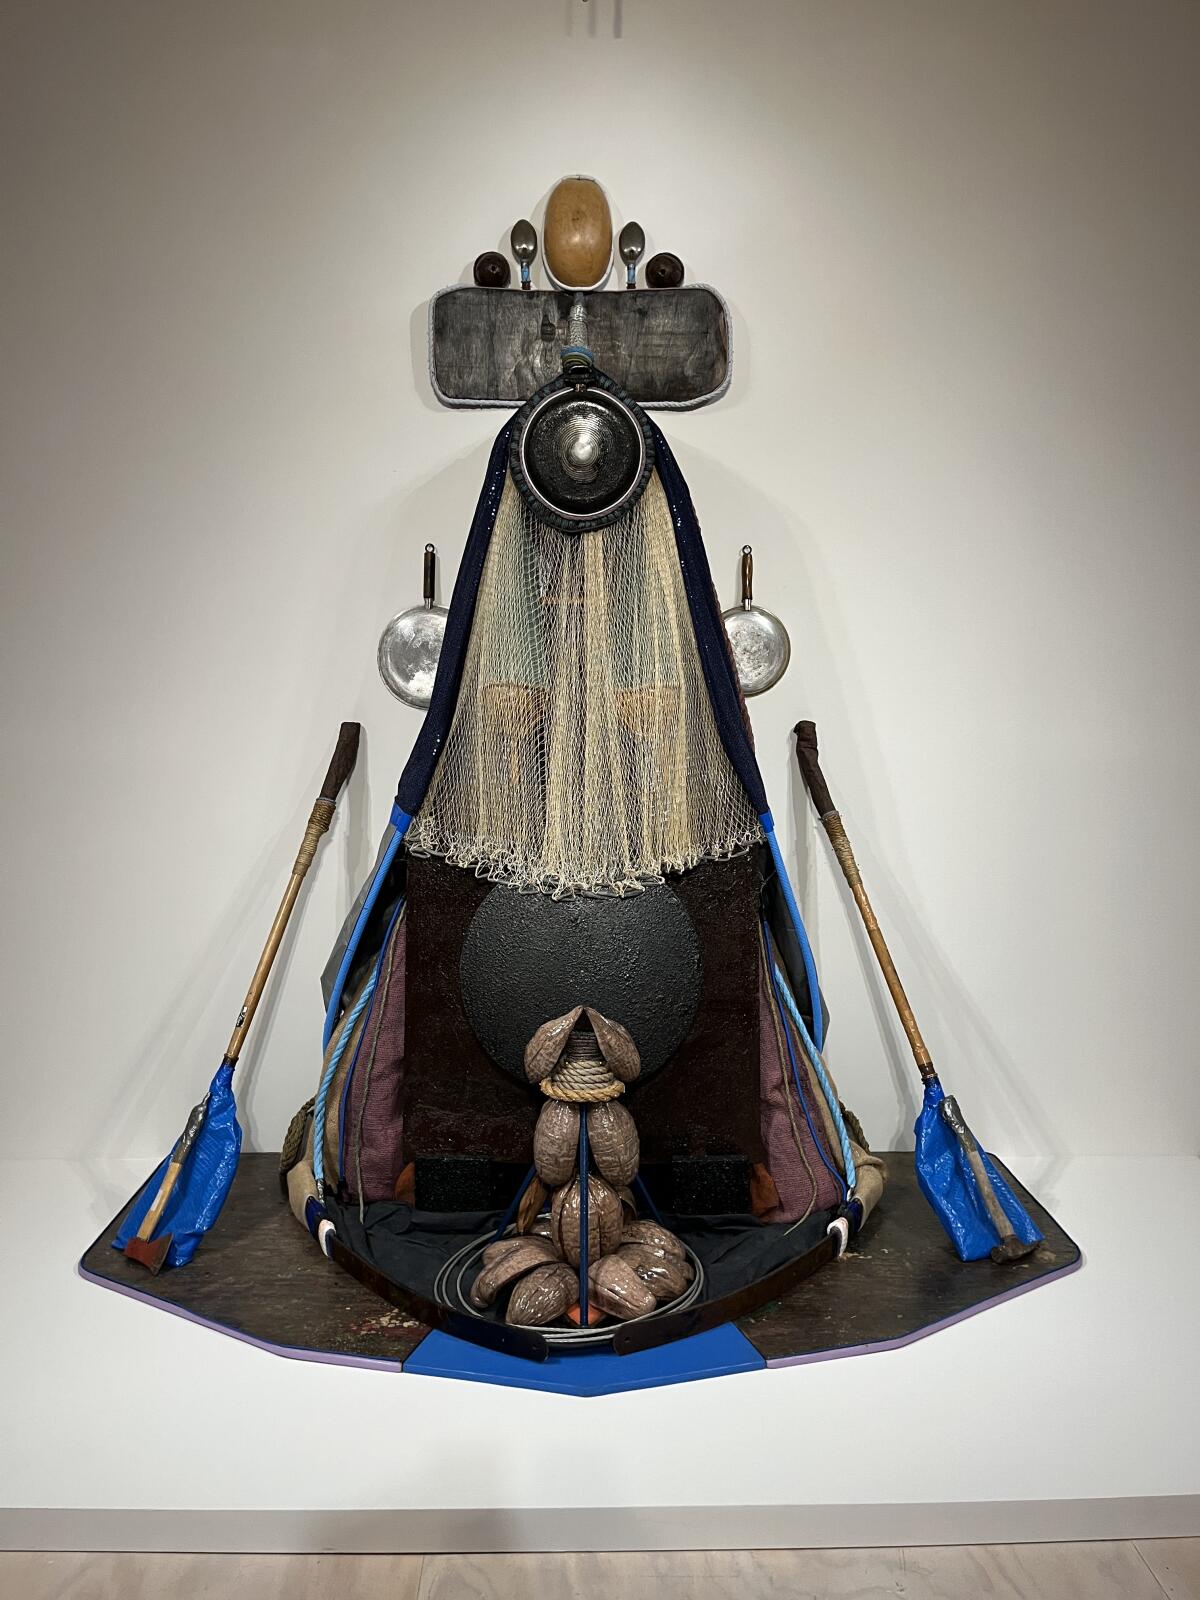 An assemblage made from tarps and old cookware evokes the figure of the Virgin Mary